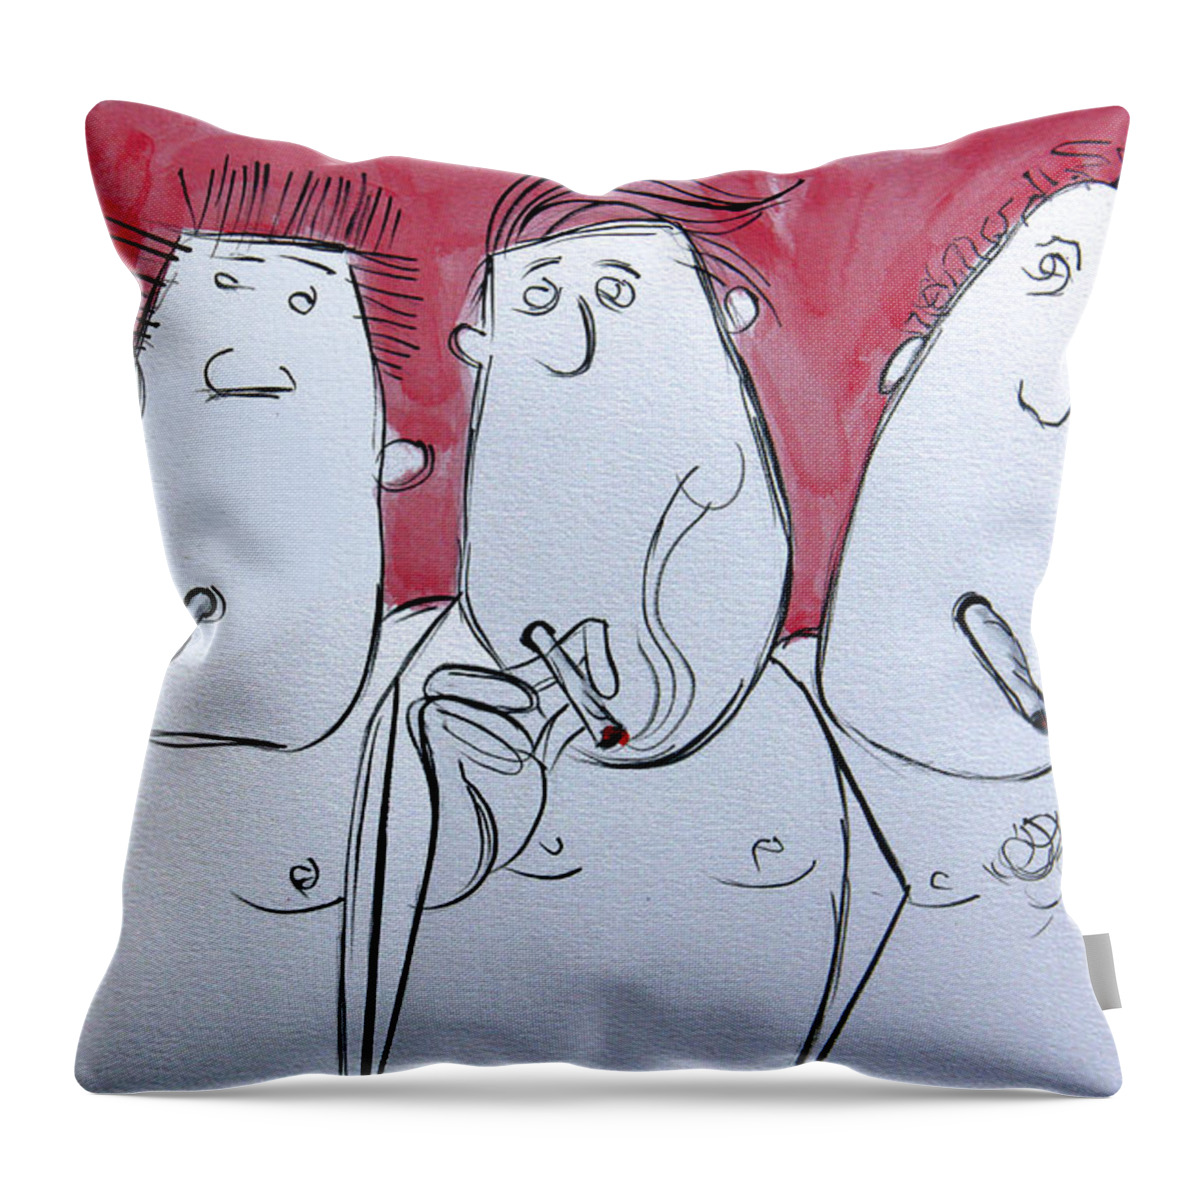 Whimsical Throw Pillow featuring the painting Group Therapy by Anthony Falbo